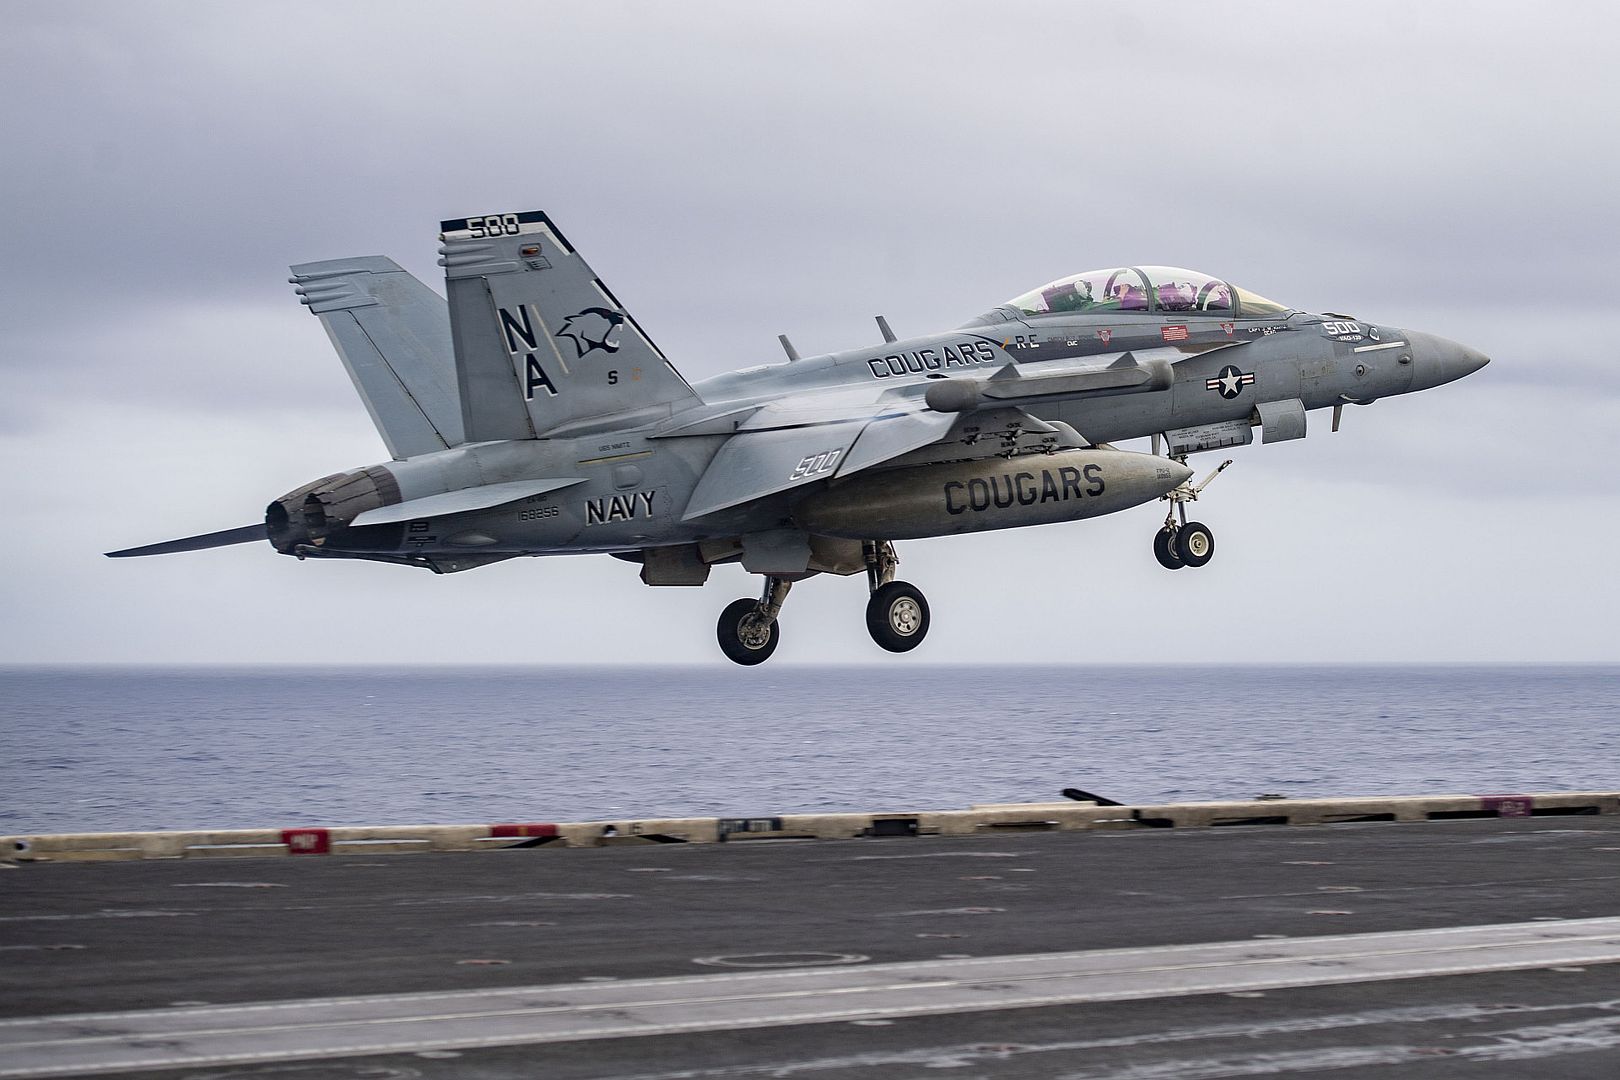  139 Launches From The Flight Deck Of The Aircraft Carrier USS Nimitz 3nD5HhhA91U5aedgKLRHJr